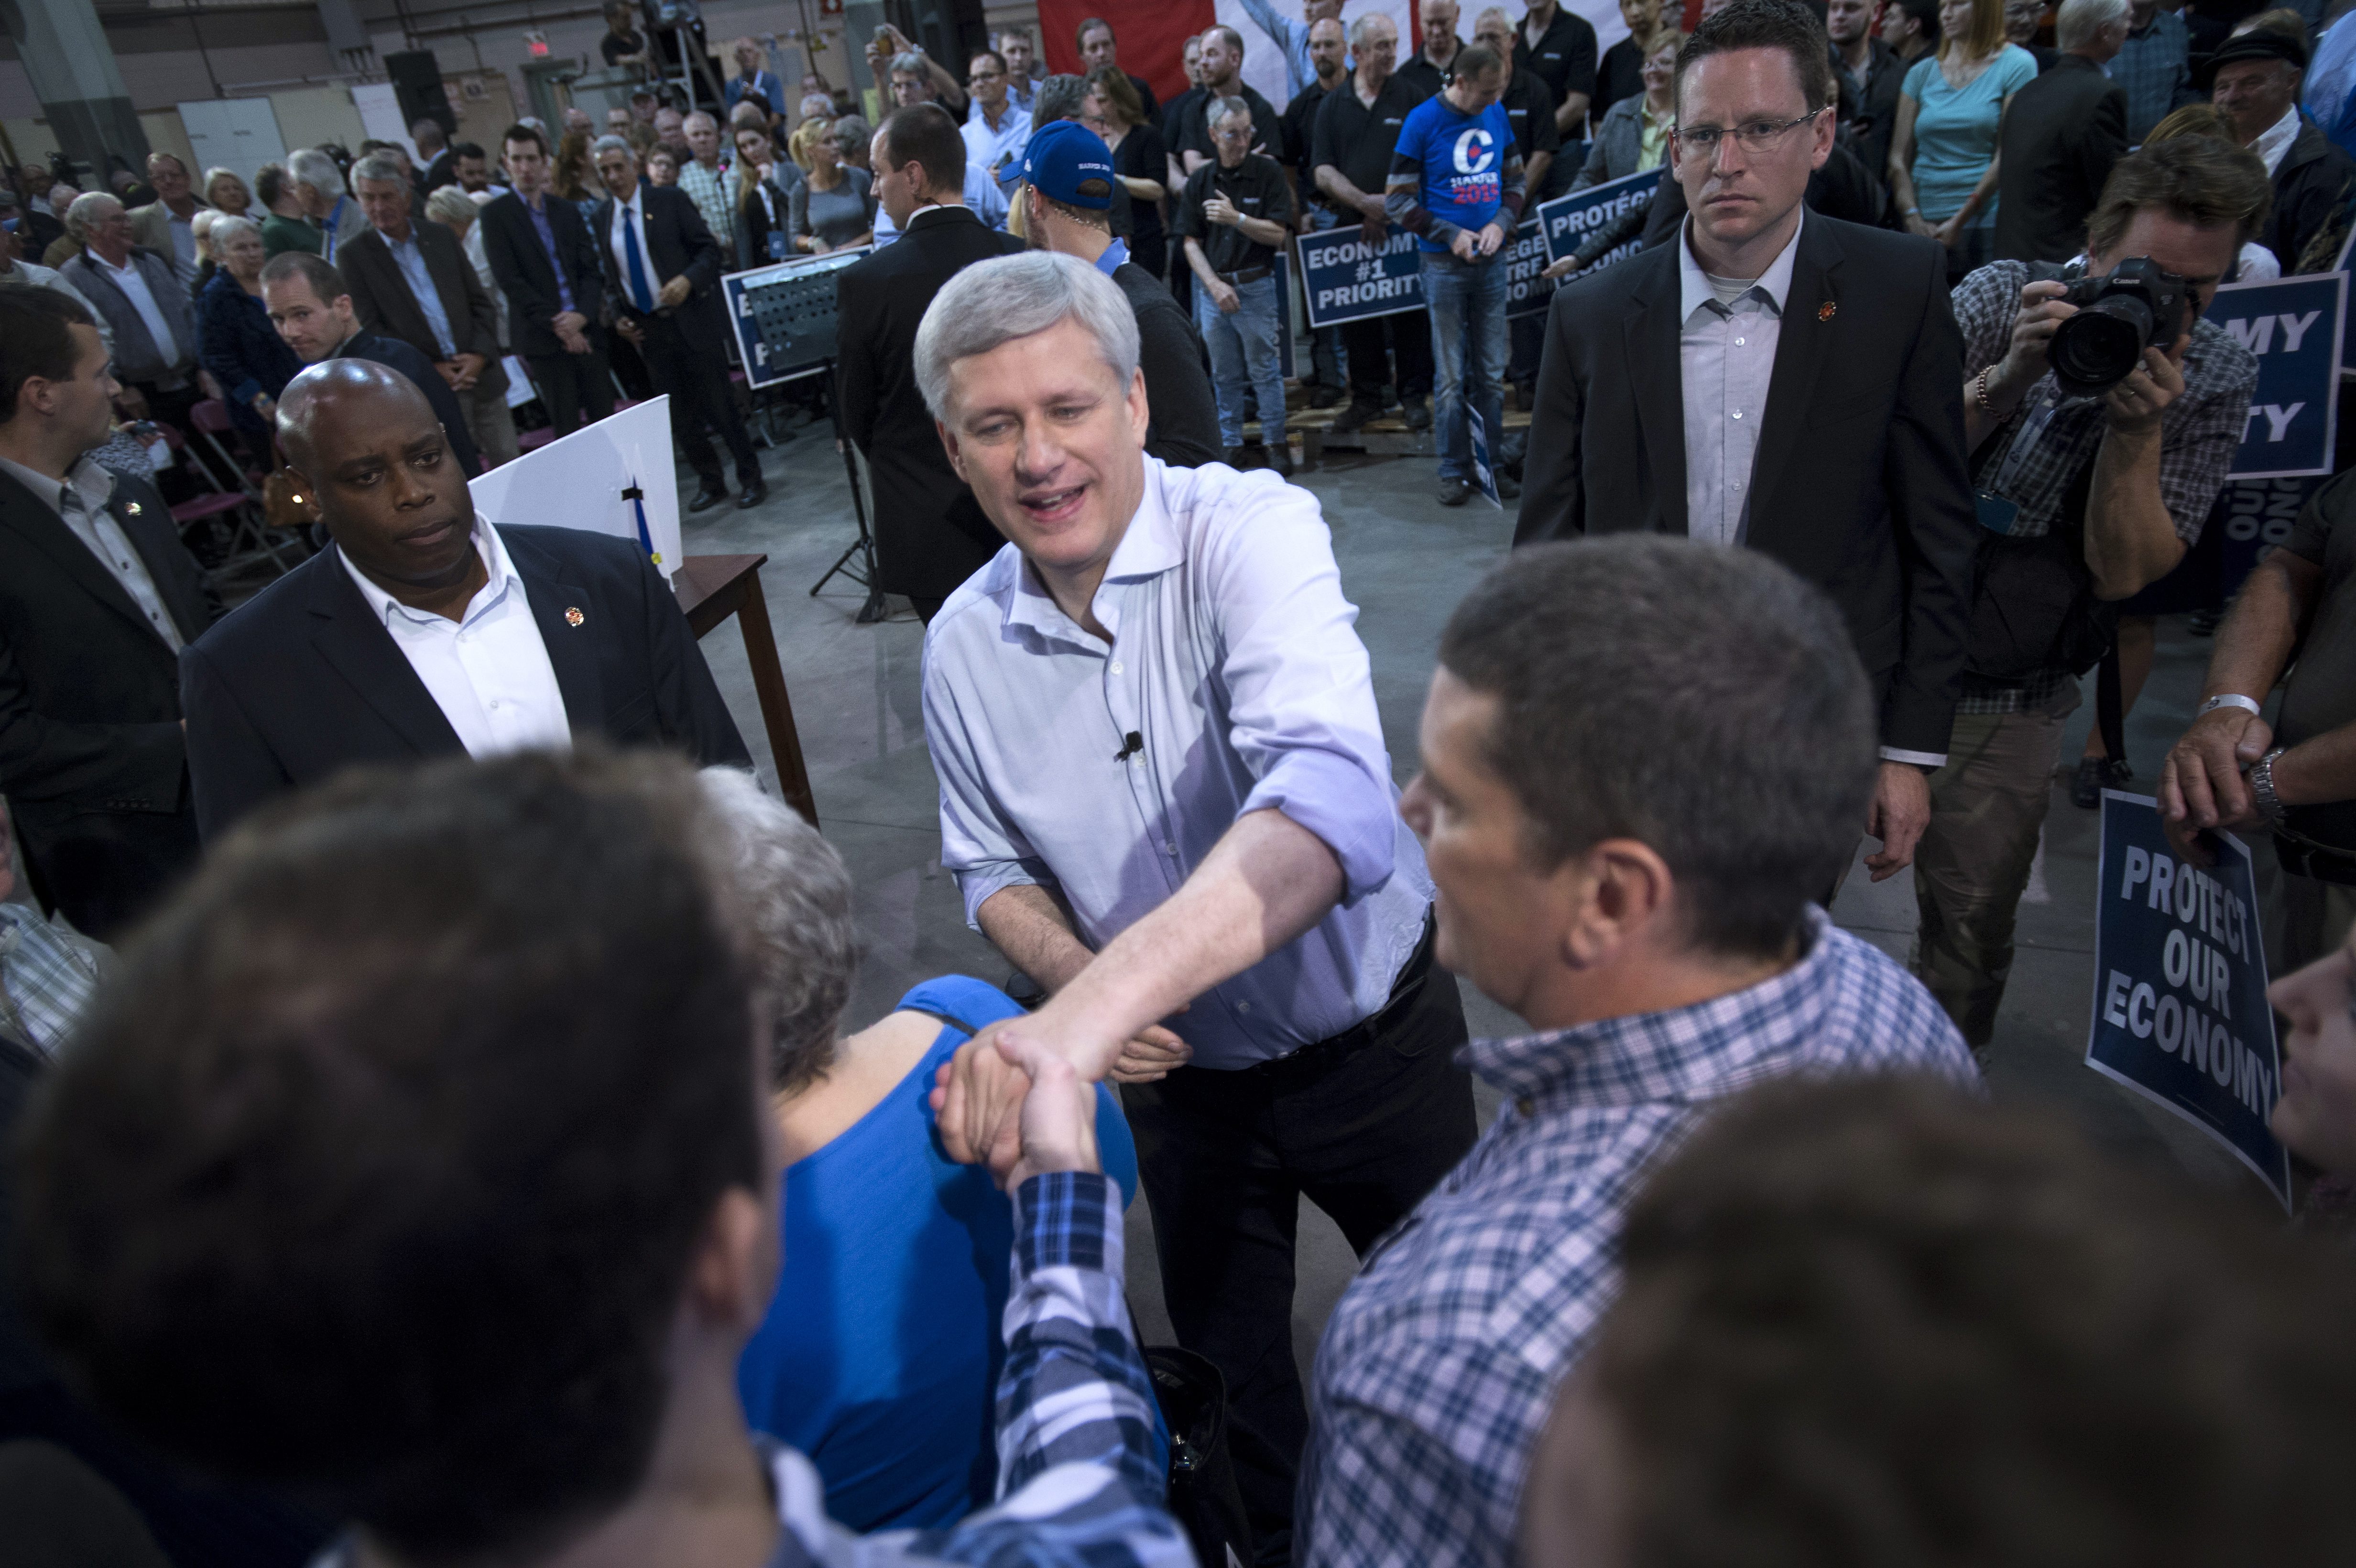 Conservative Leader Stephen Harper shakes hands with supporters during a campaign event at the J.P. Bowman tool and die company in Brantford, Ontario, Canada Wednesday, Oct. 14, 2015. (Jonathan Hayward/The Canadian Press via AP) MANDATORY CREDIT